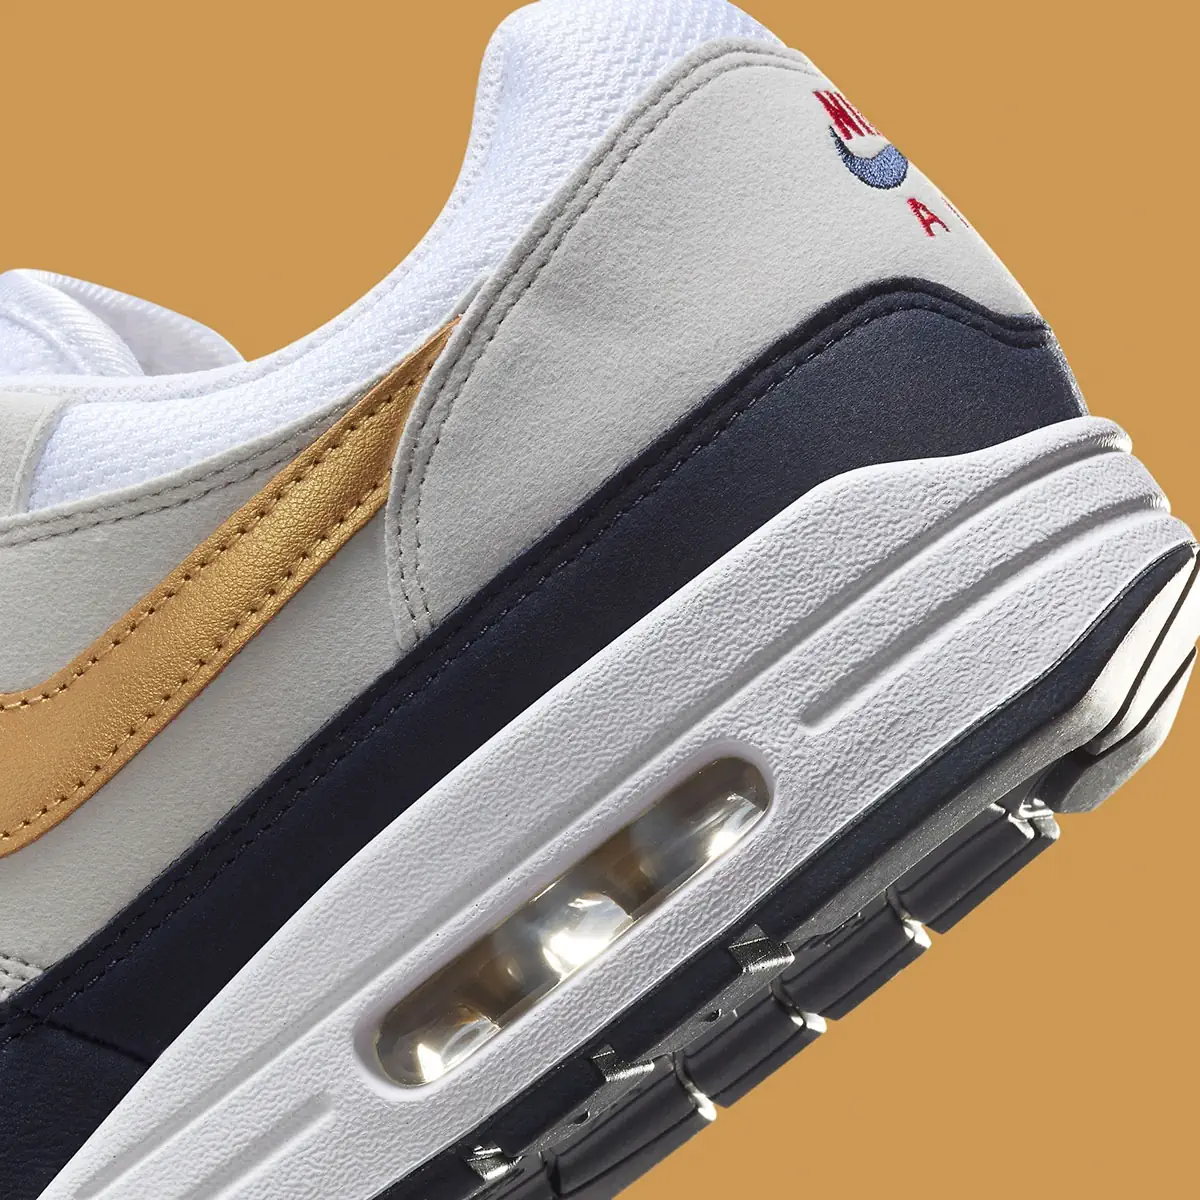 Nike Air Max 1 "Olympic" rings in classic style for the Games